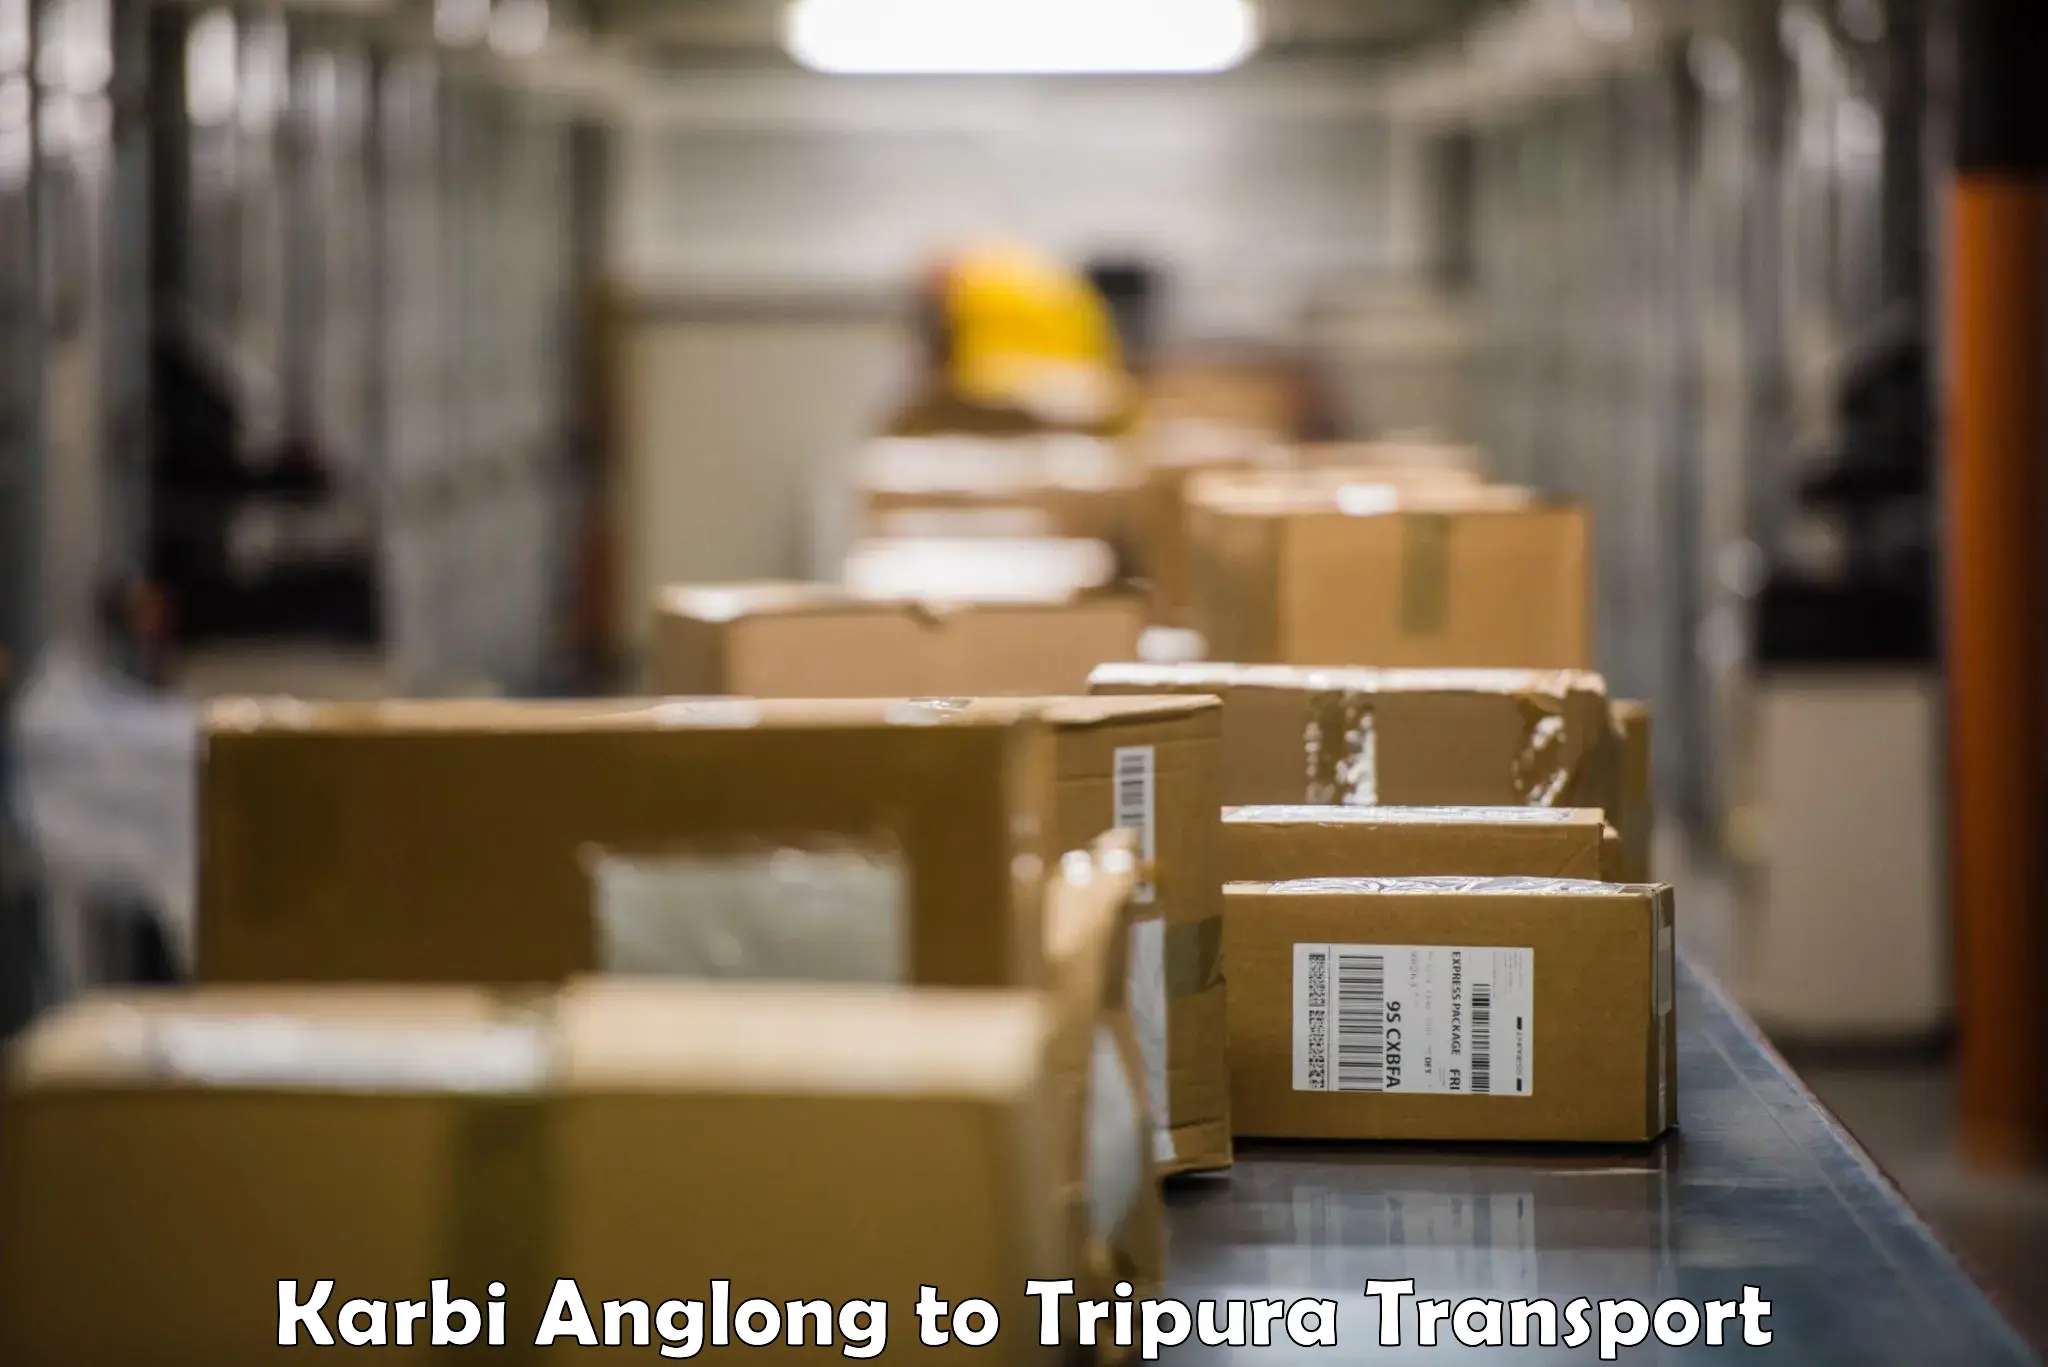 Transportation services in Karbi Anglong to Agartala